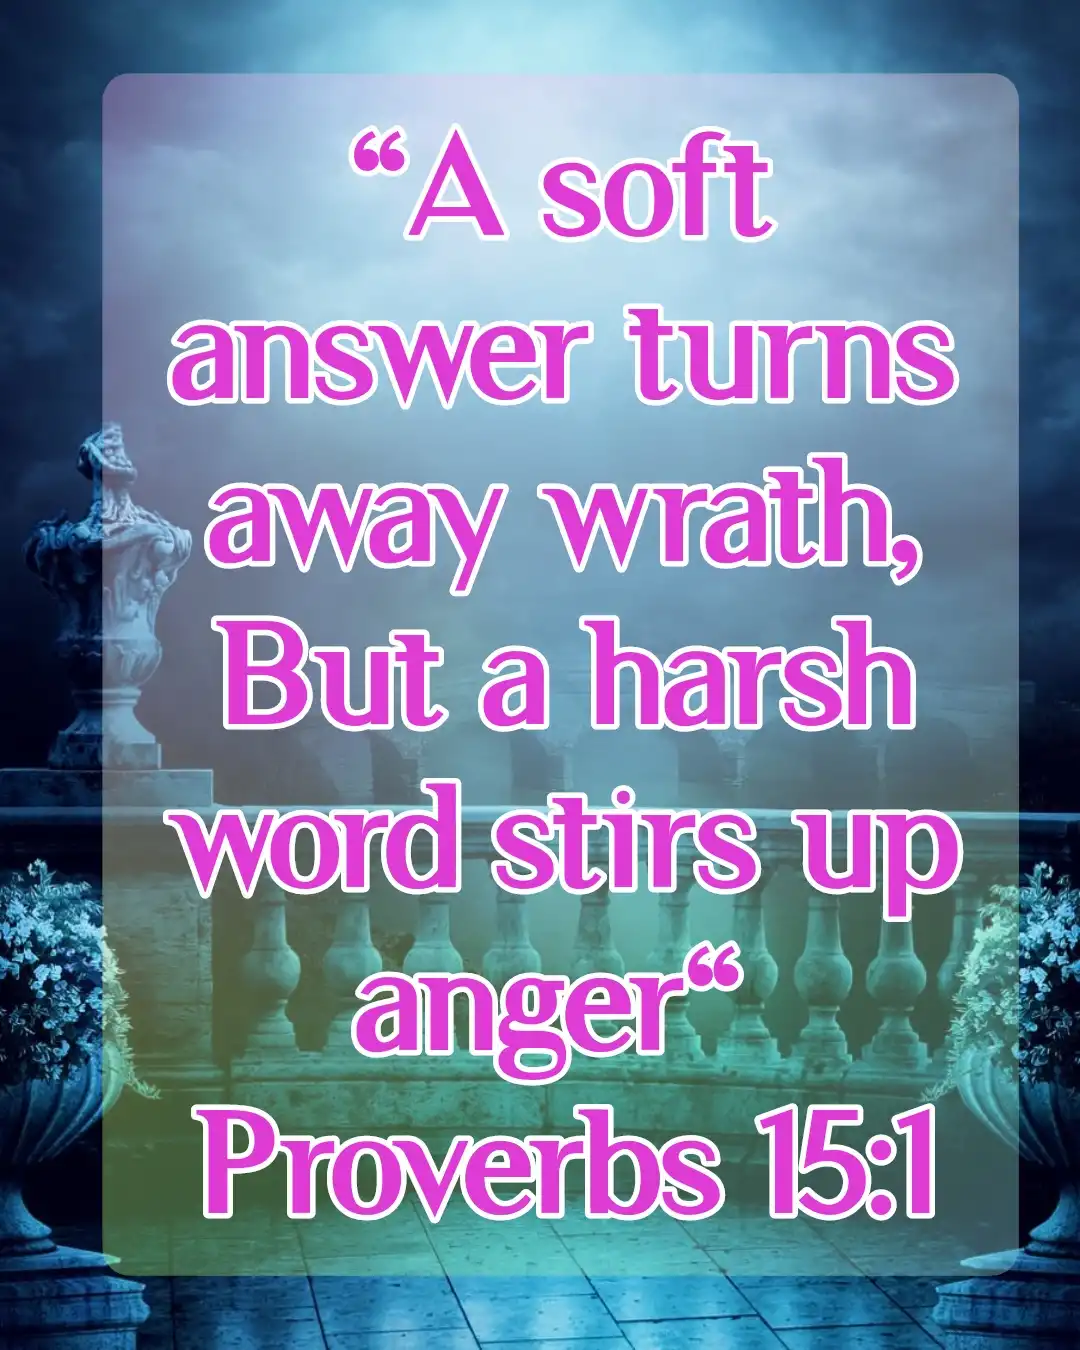 bible verses about anger (Proverbs 15:1)